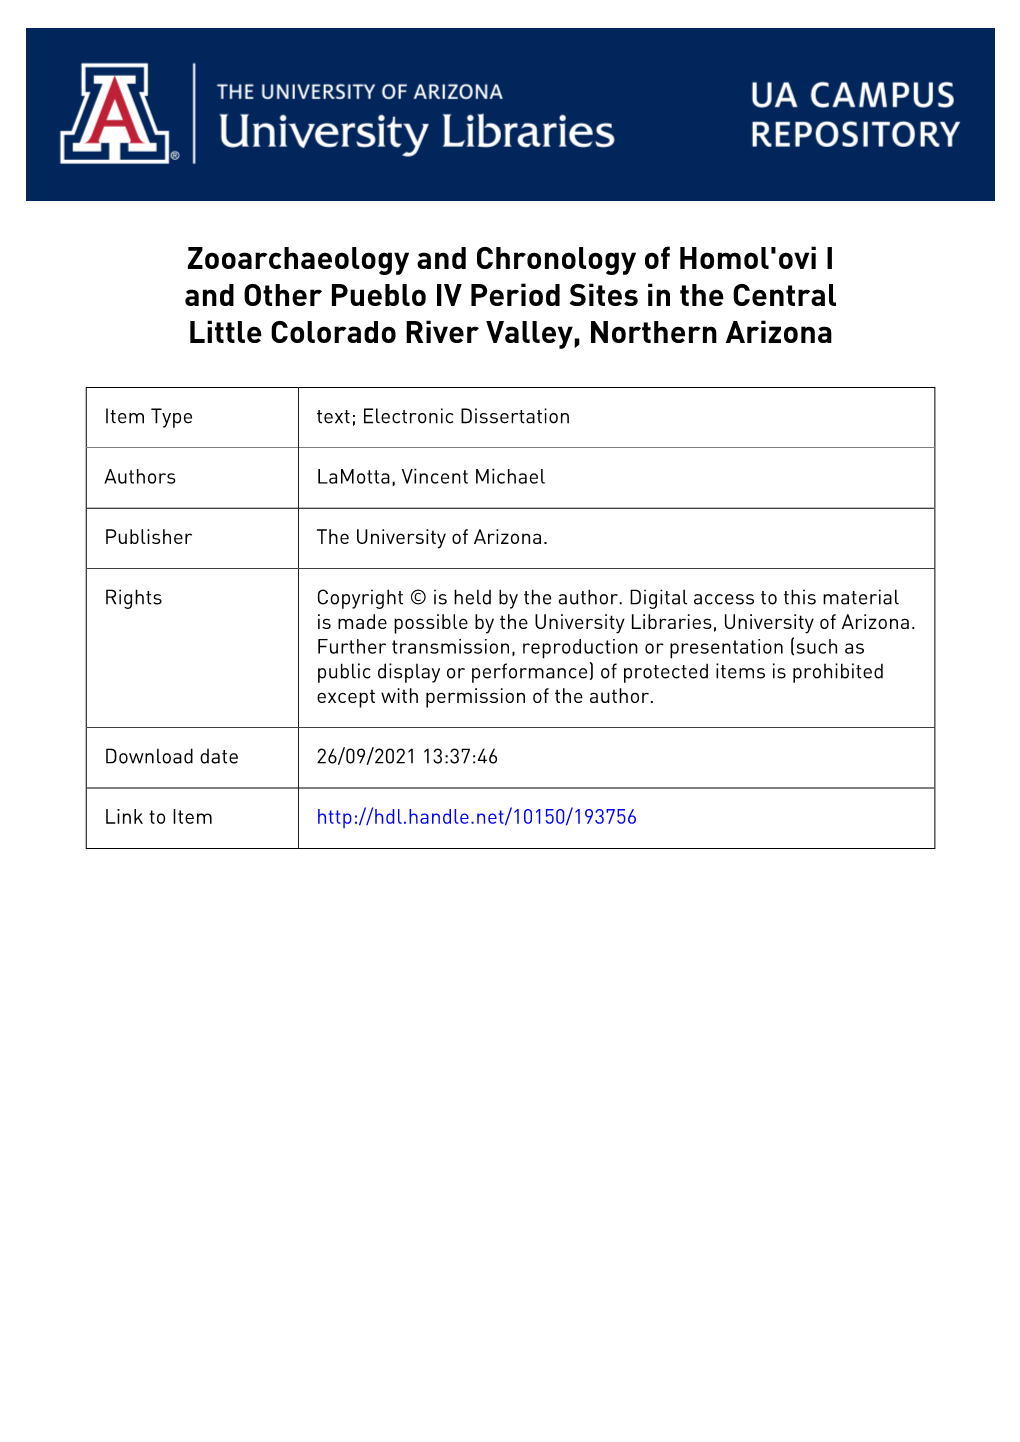 Zooarchaeology and Chronology of Homol'ovi I and Other Pueblo IV Period Sites in the Central Little Colorado River Valley, Northern Arizona